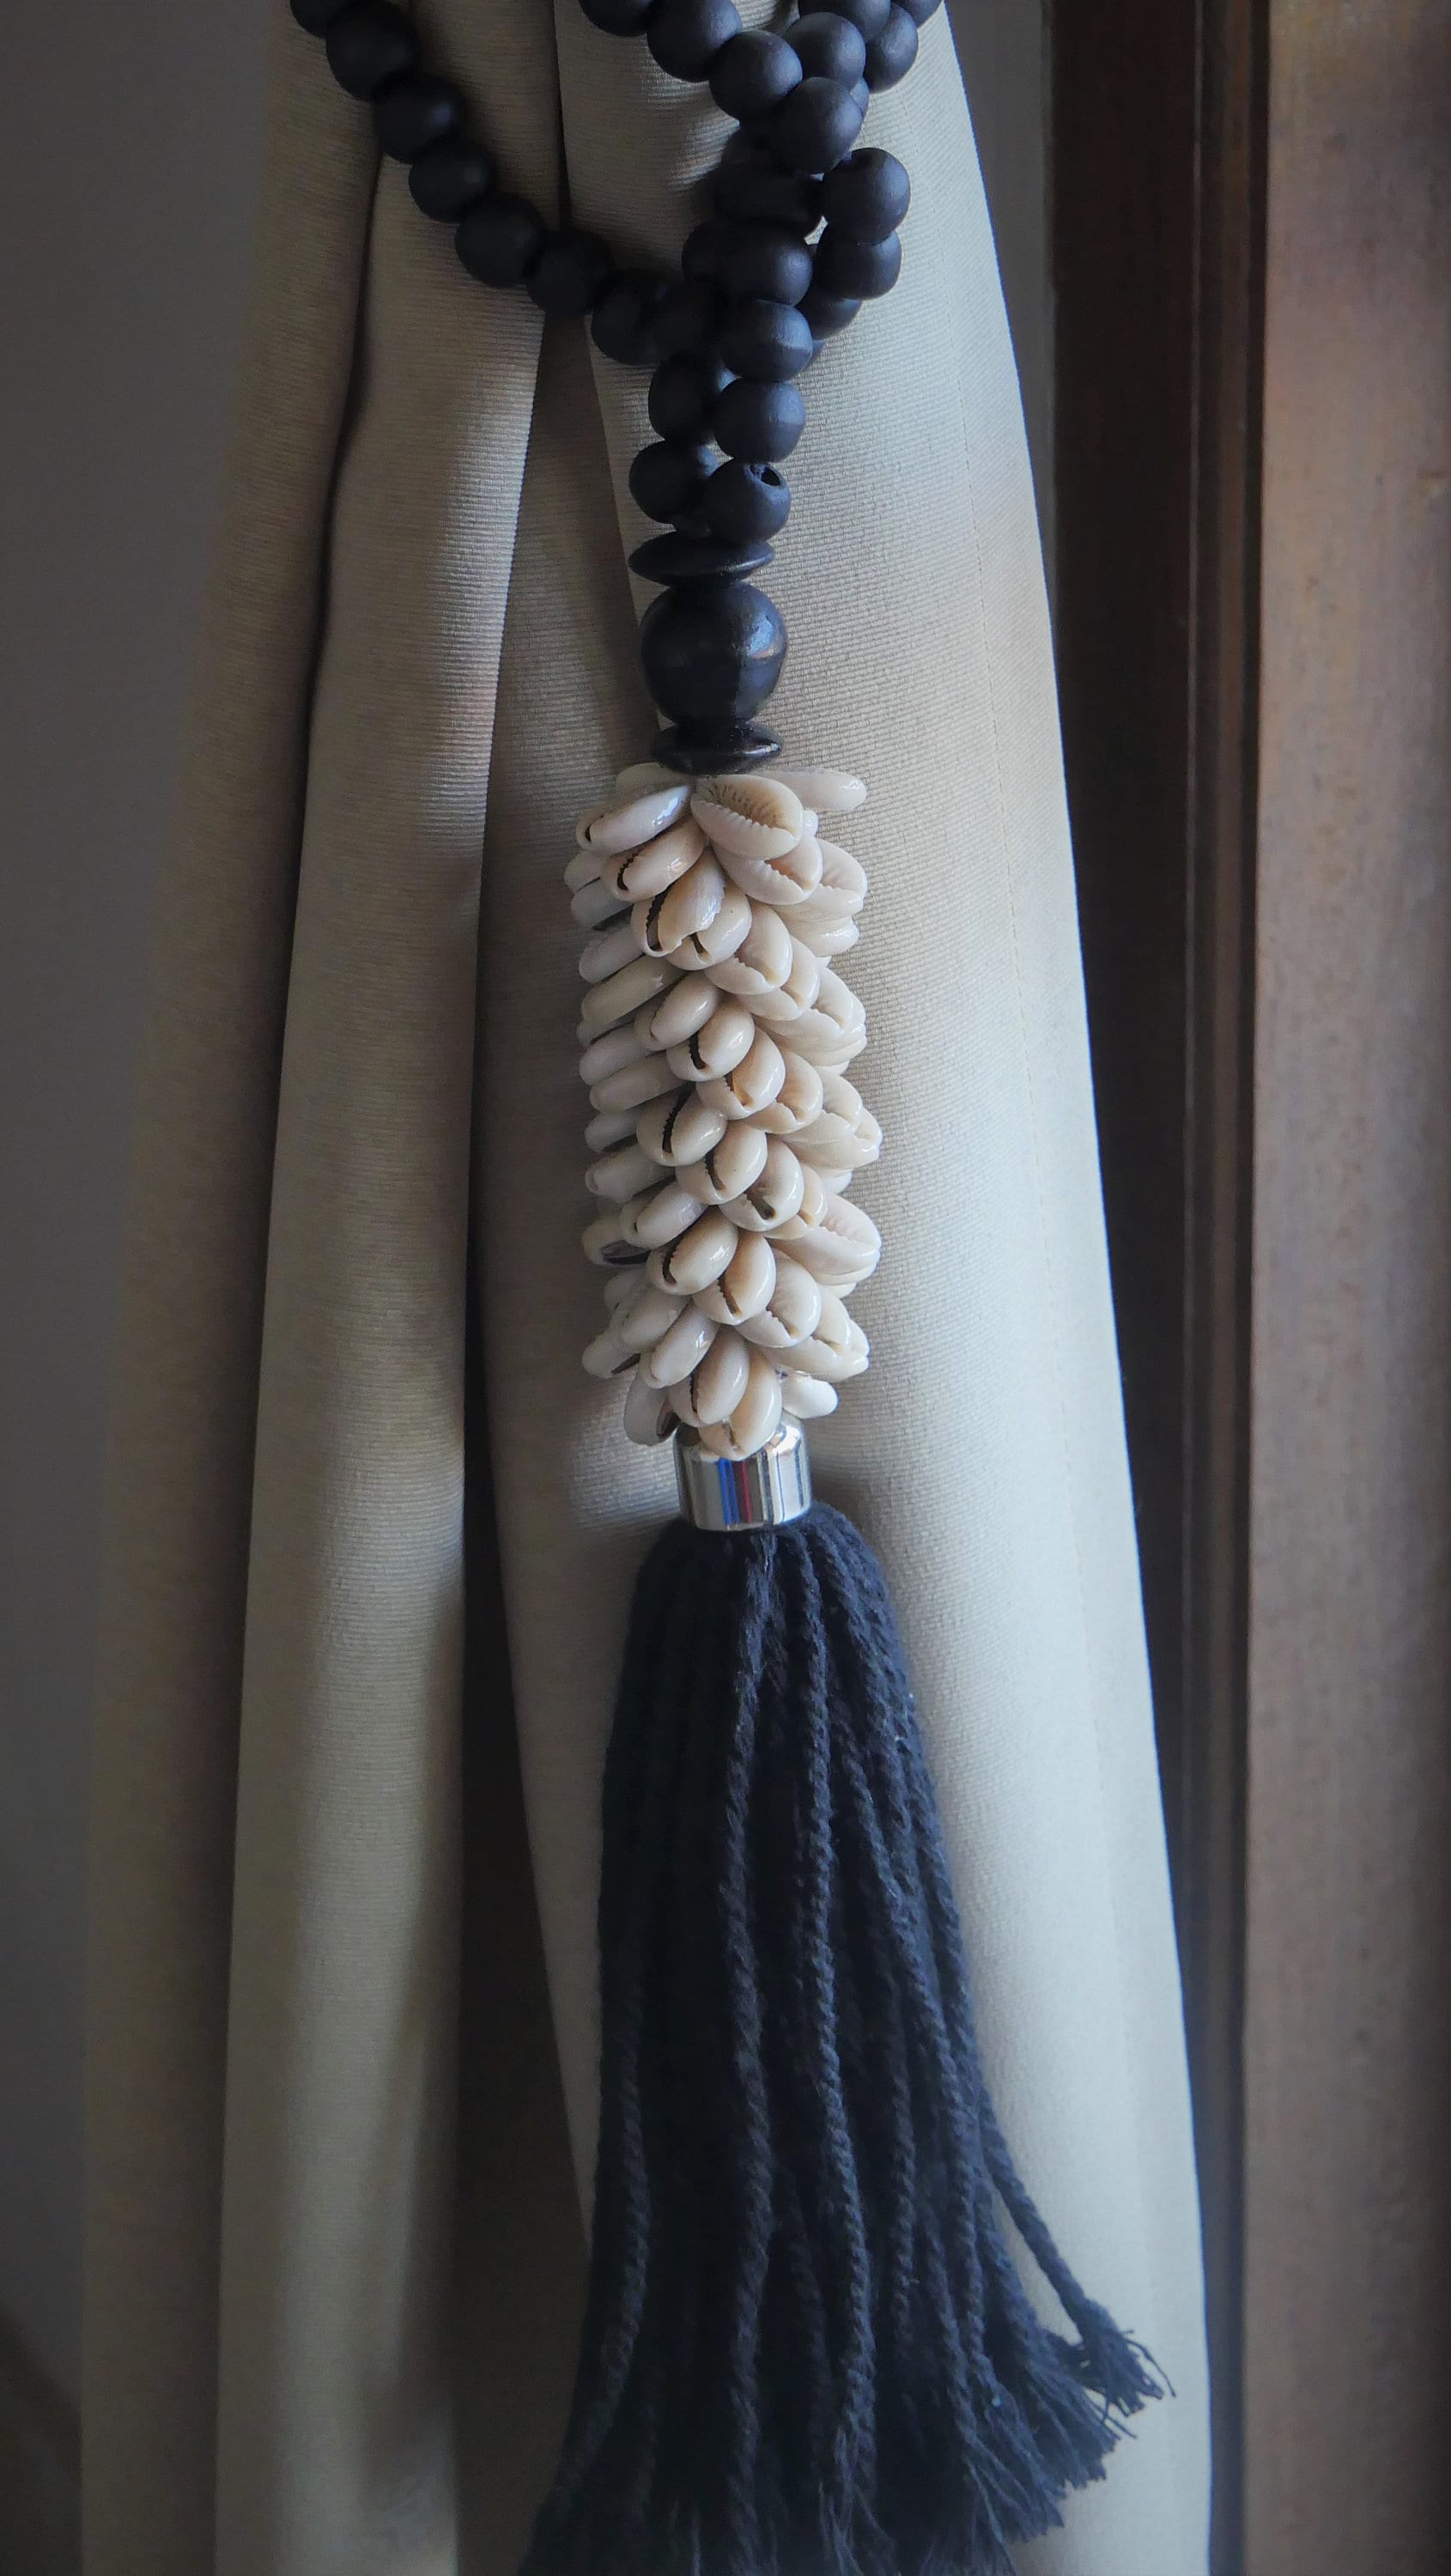 Pair of Handmade Boho Bed and Curtain Tassels with sea shells, Curtain Decor Accessories, White Curtain Holdback, Black Curtain Holdback